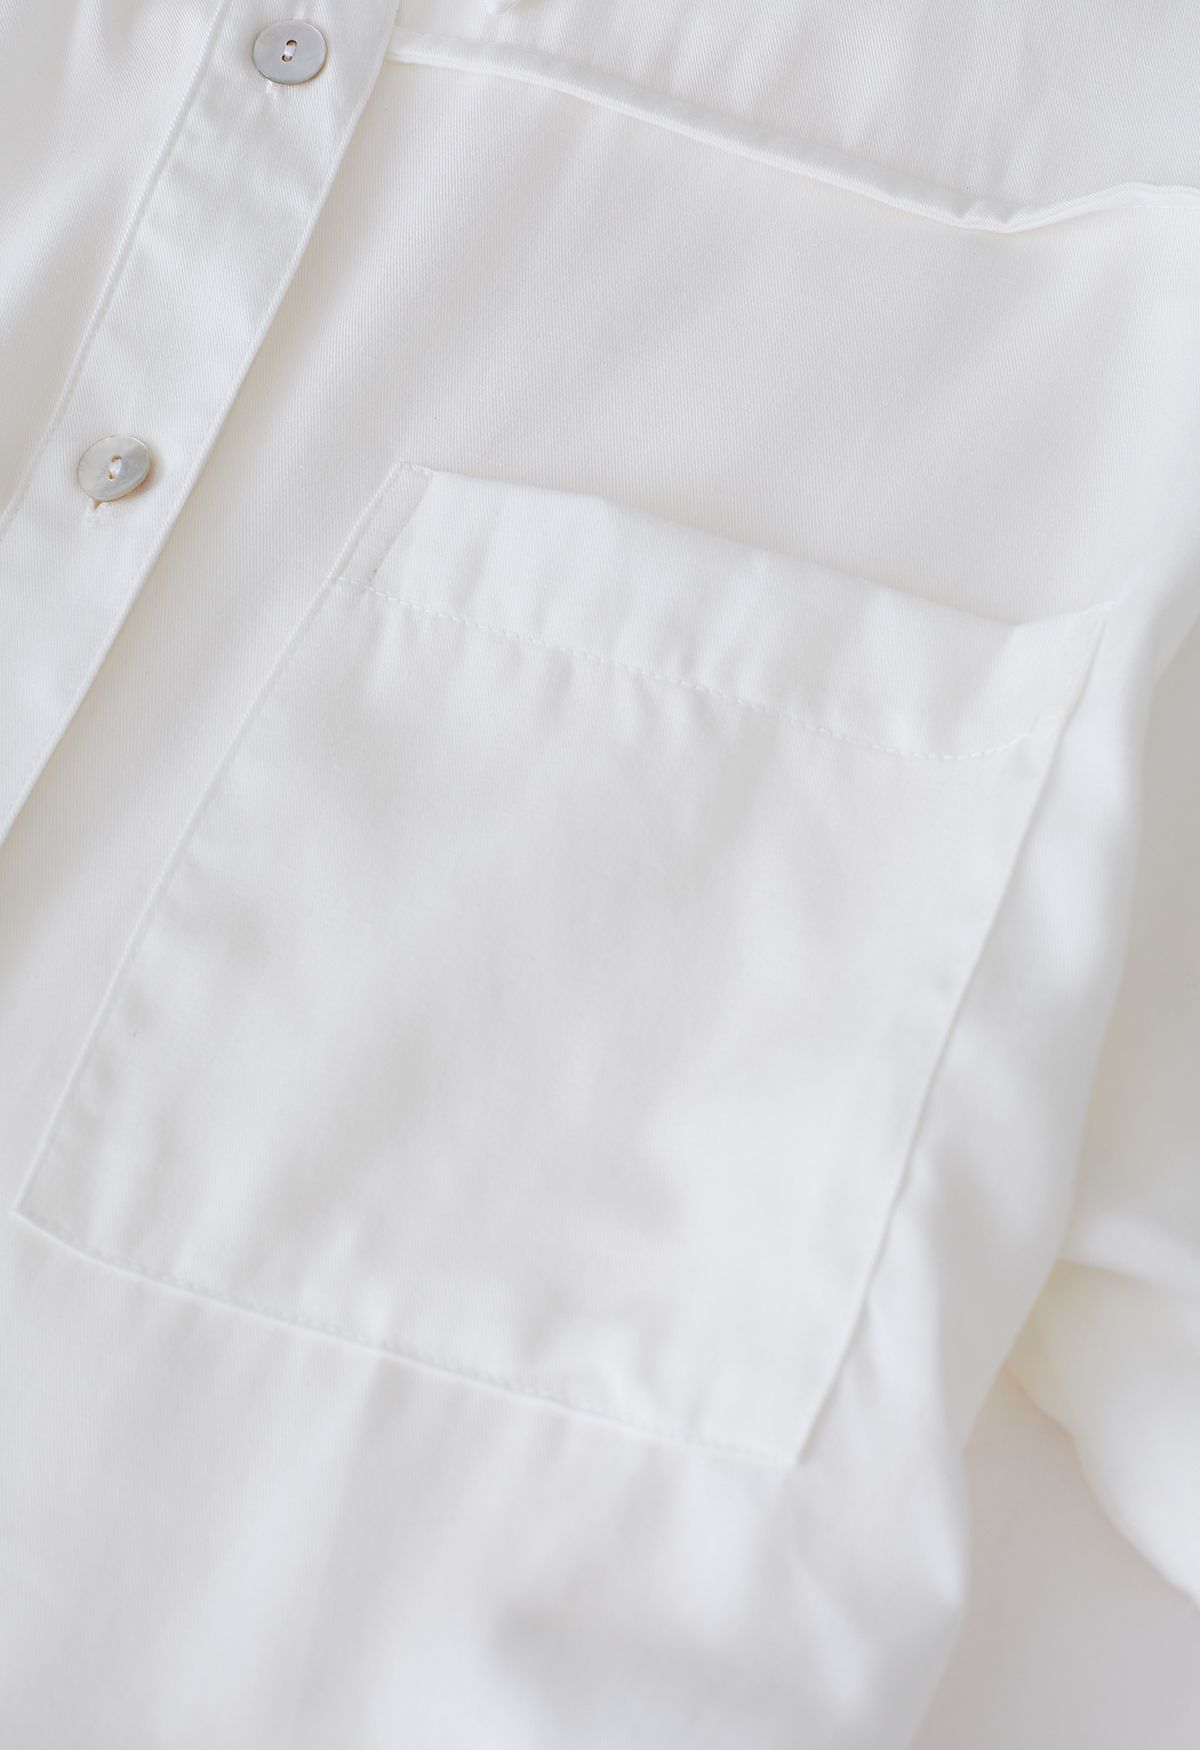 Pocket Short Sleeve Button Up Shirt in Ivory